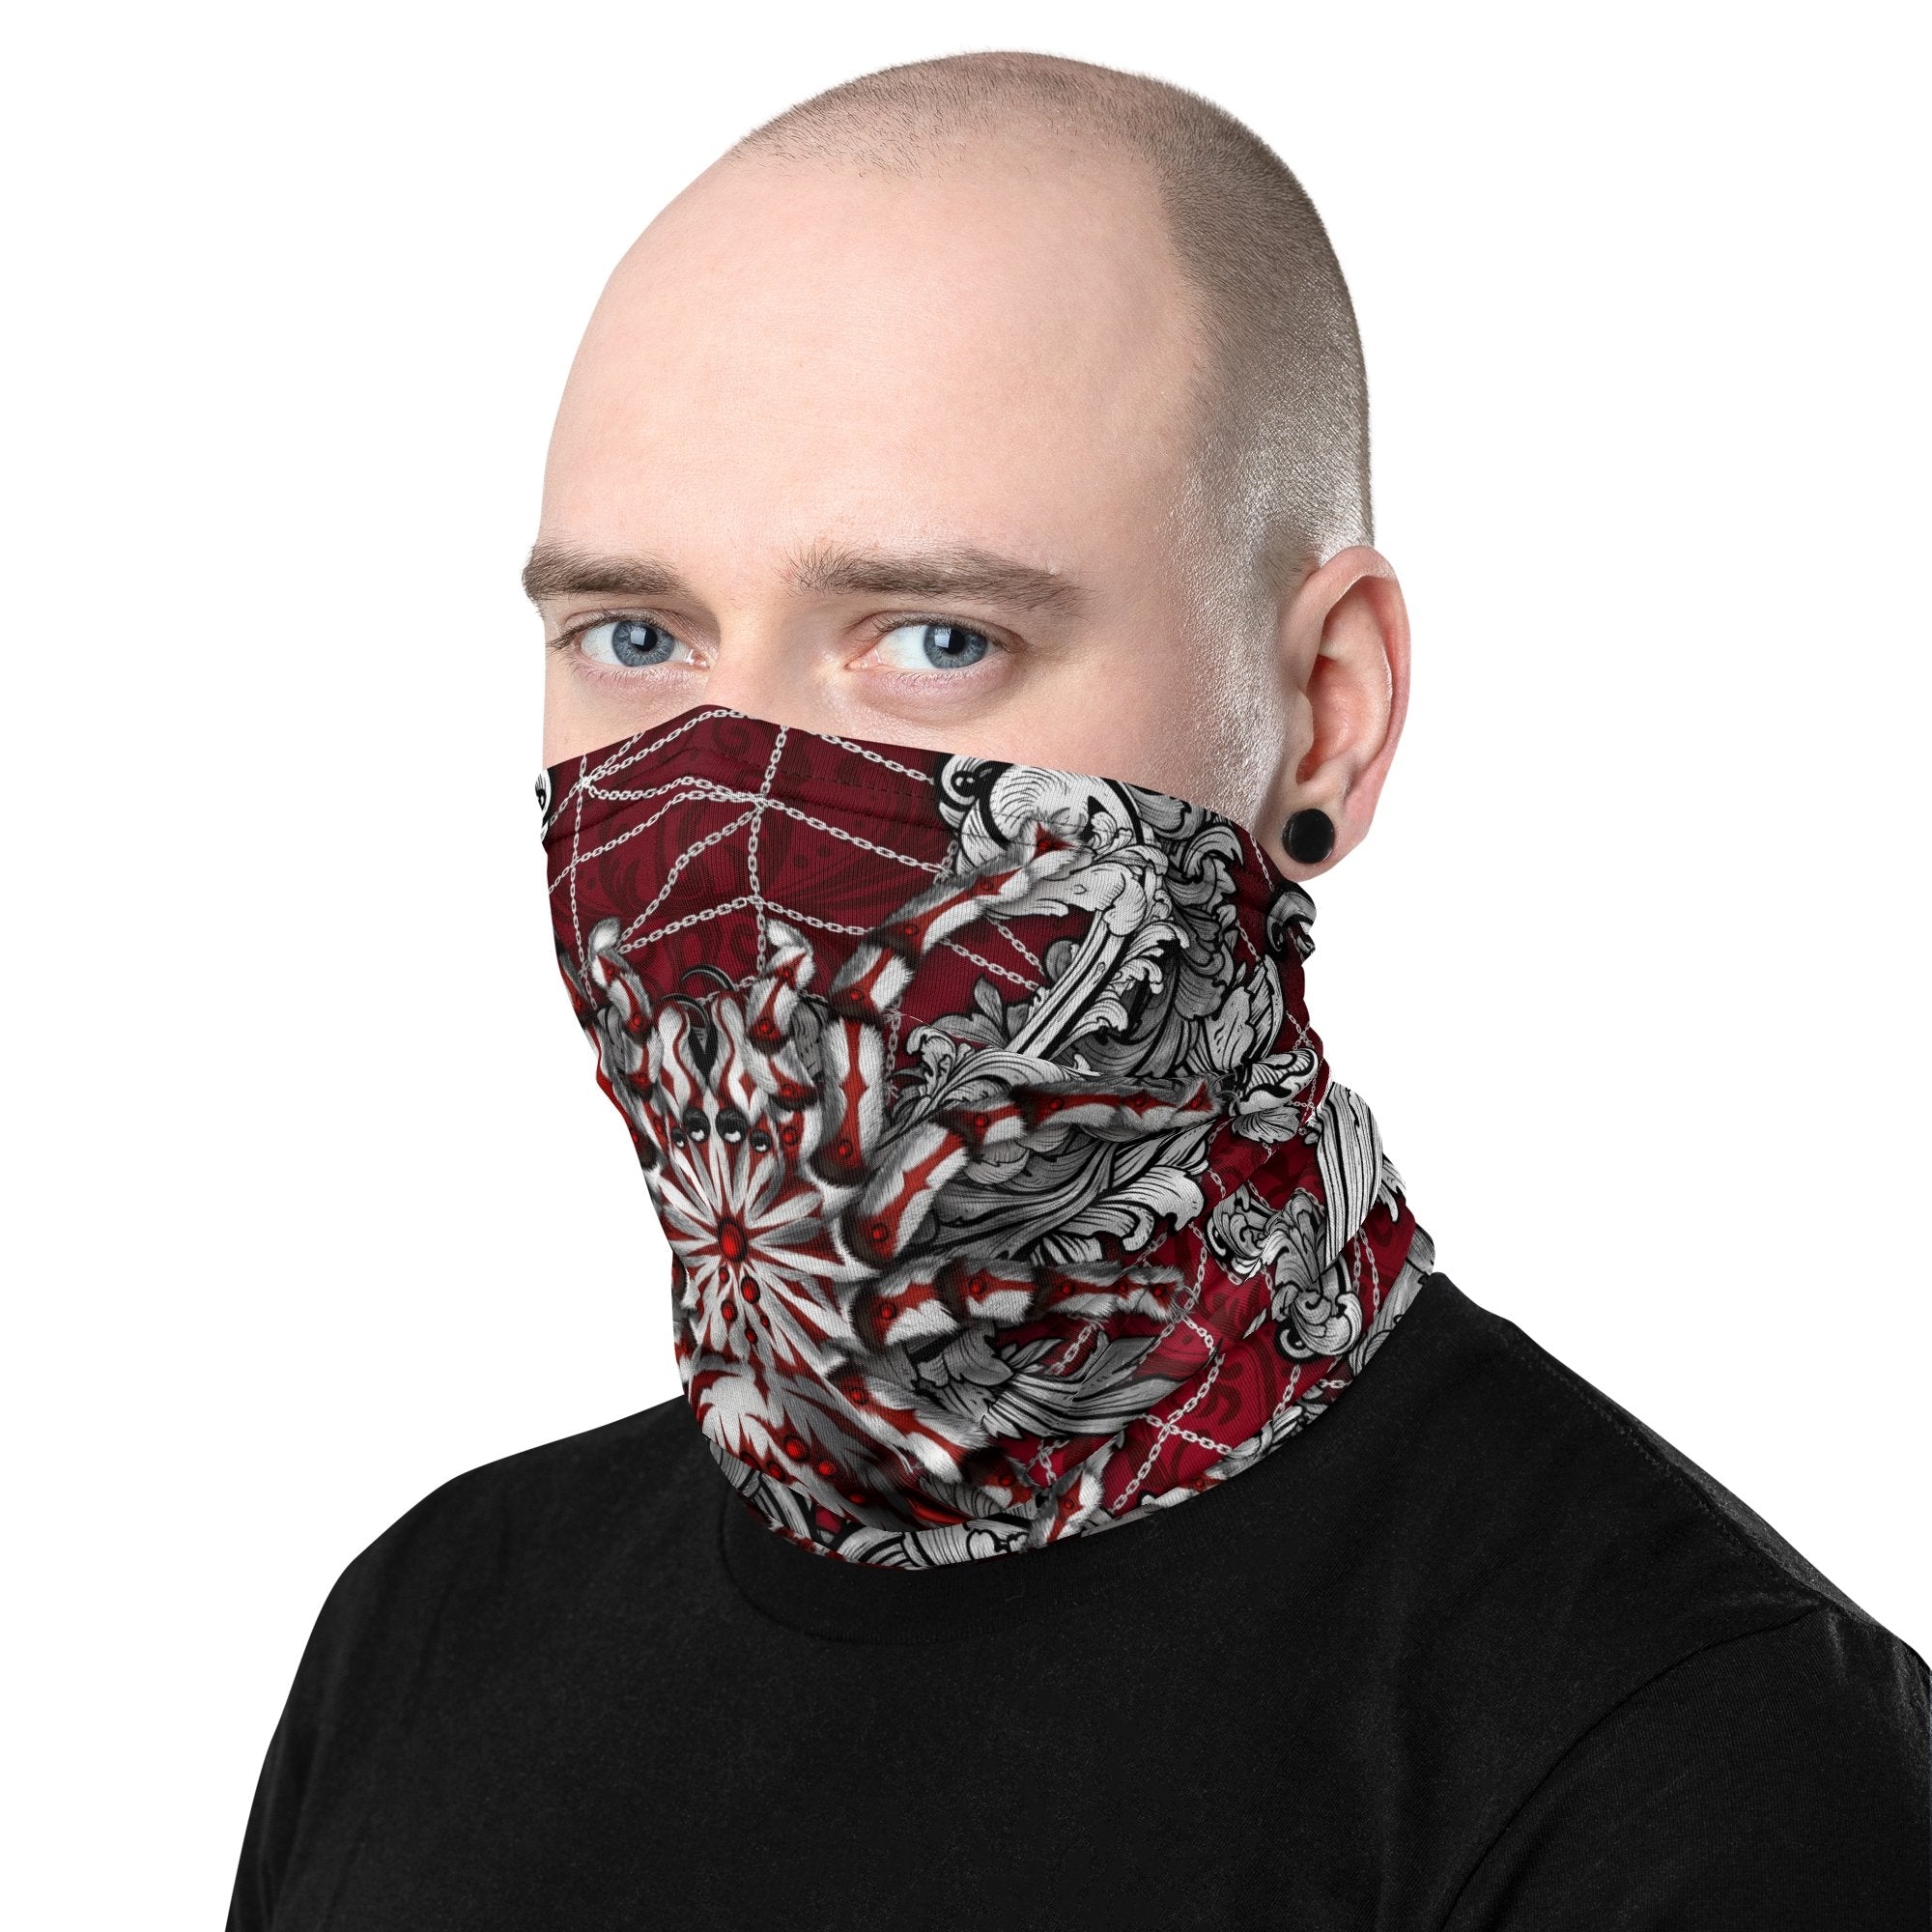 Silver Spider Neck Gaiter, Face Mask, Head Covering, Alternative Outfit, Tarantula Lover Gift - Black and Red - Abysm Internal